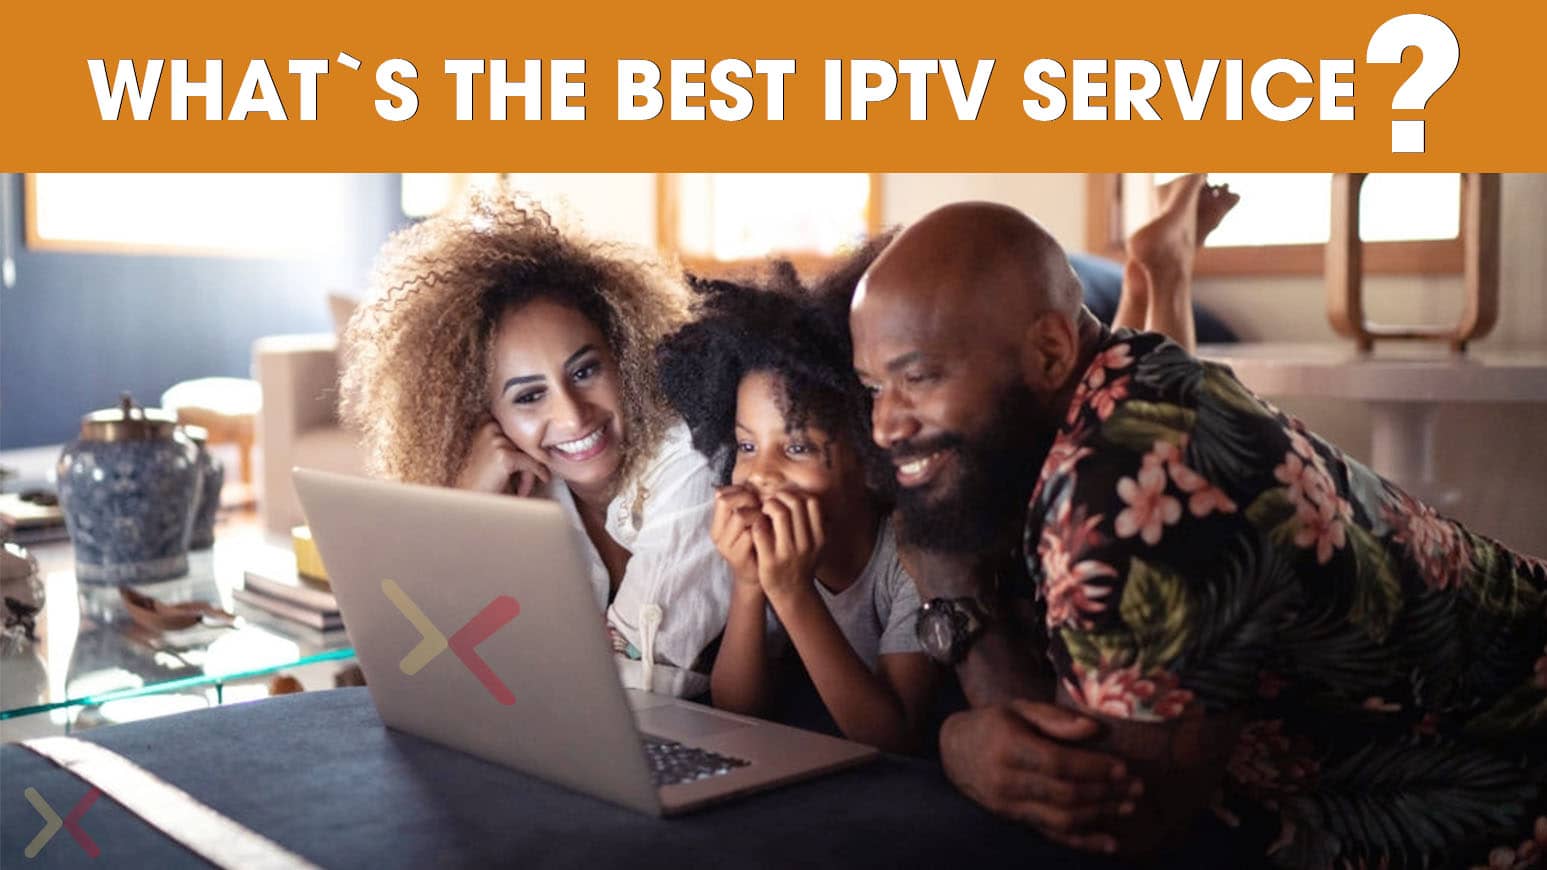 What`s the best IPTV services